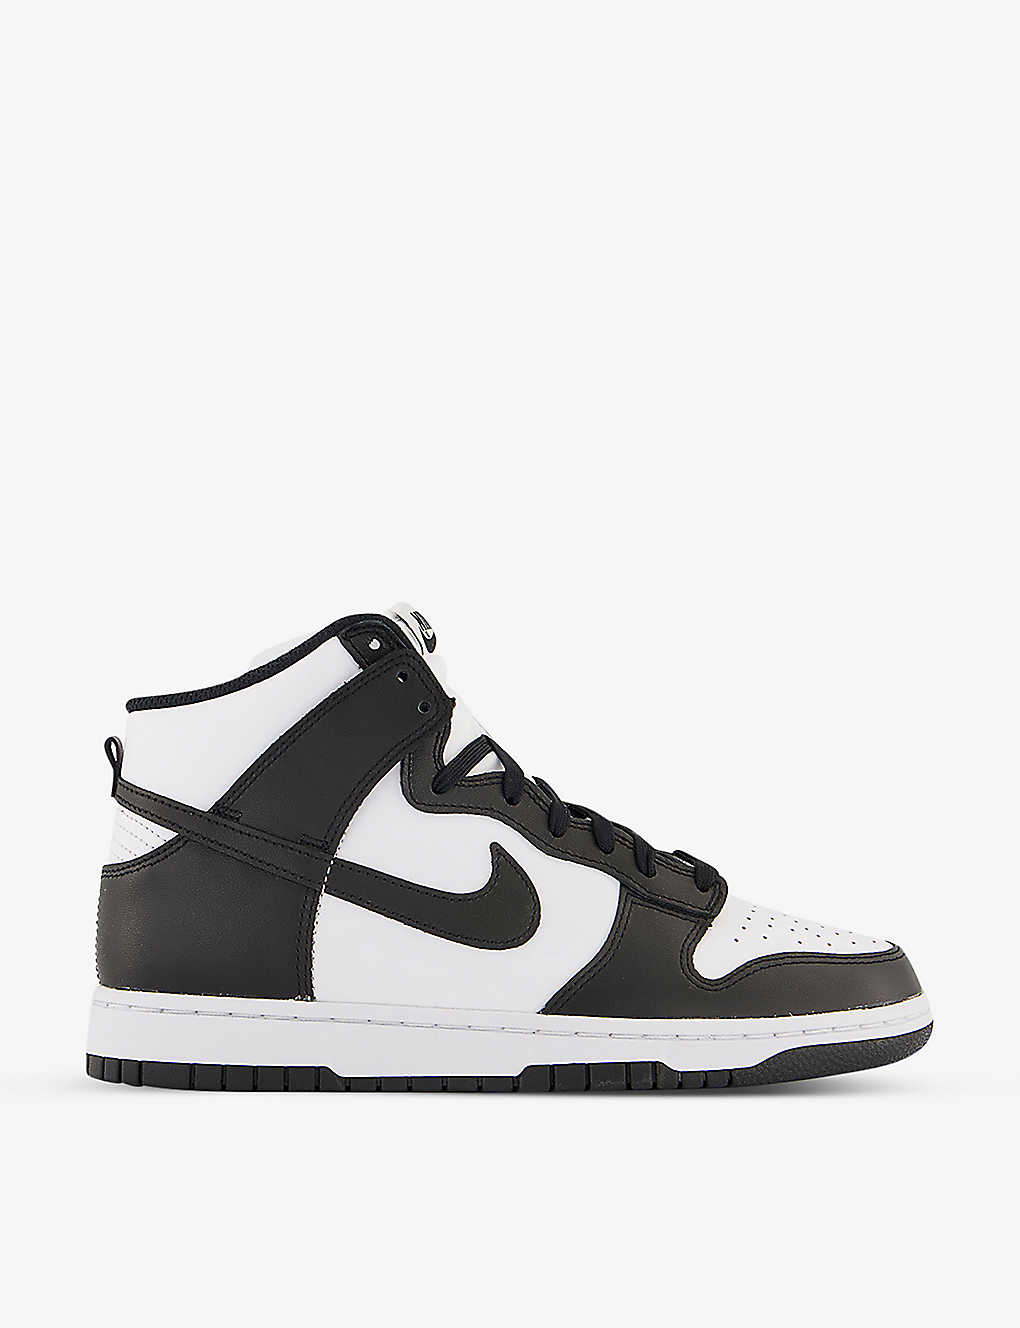 NIKE NIKE MEN'S WHITE BLACK DUNK HIGH RETRO LOGO-EMBROIDERED LEATHER HIGH-TOP TRAINERS,56569699